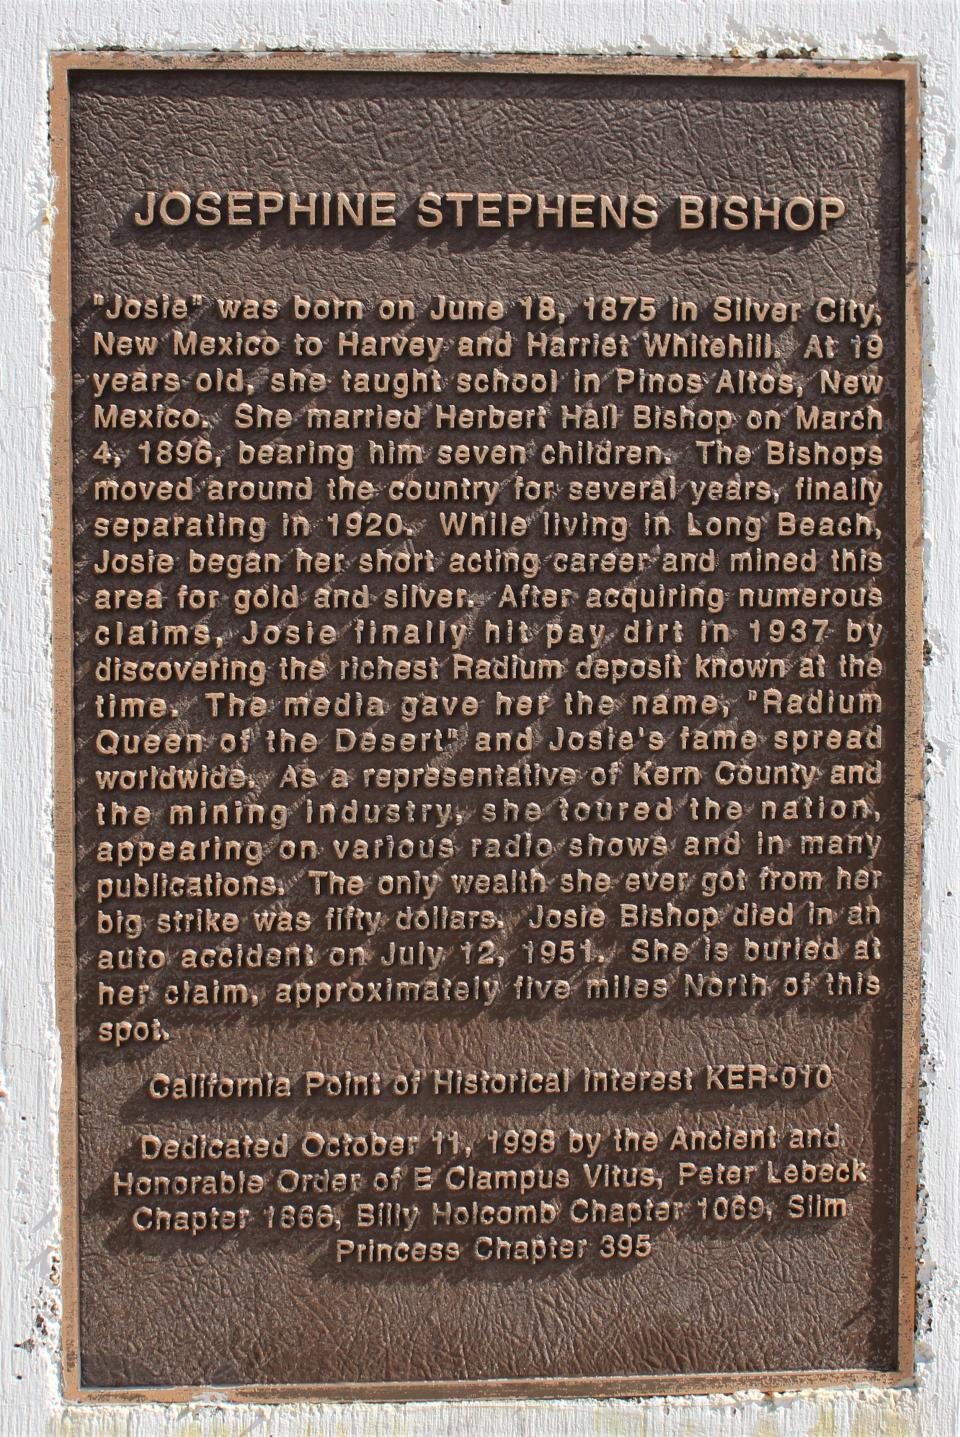 Marker for Josephine Stephens Bishop, a California historical site.